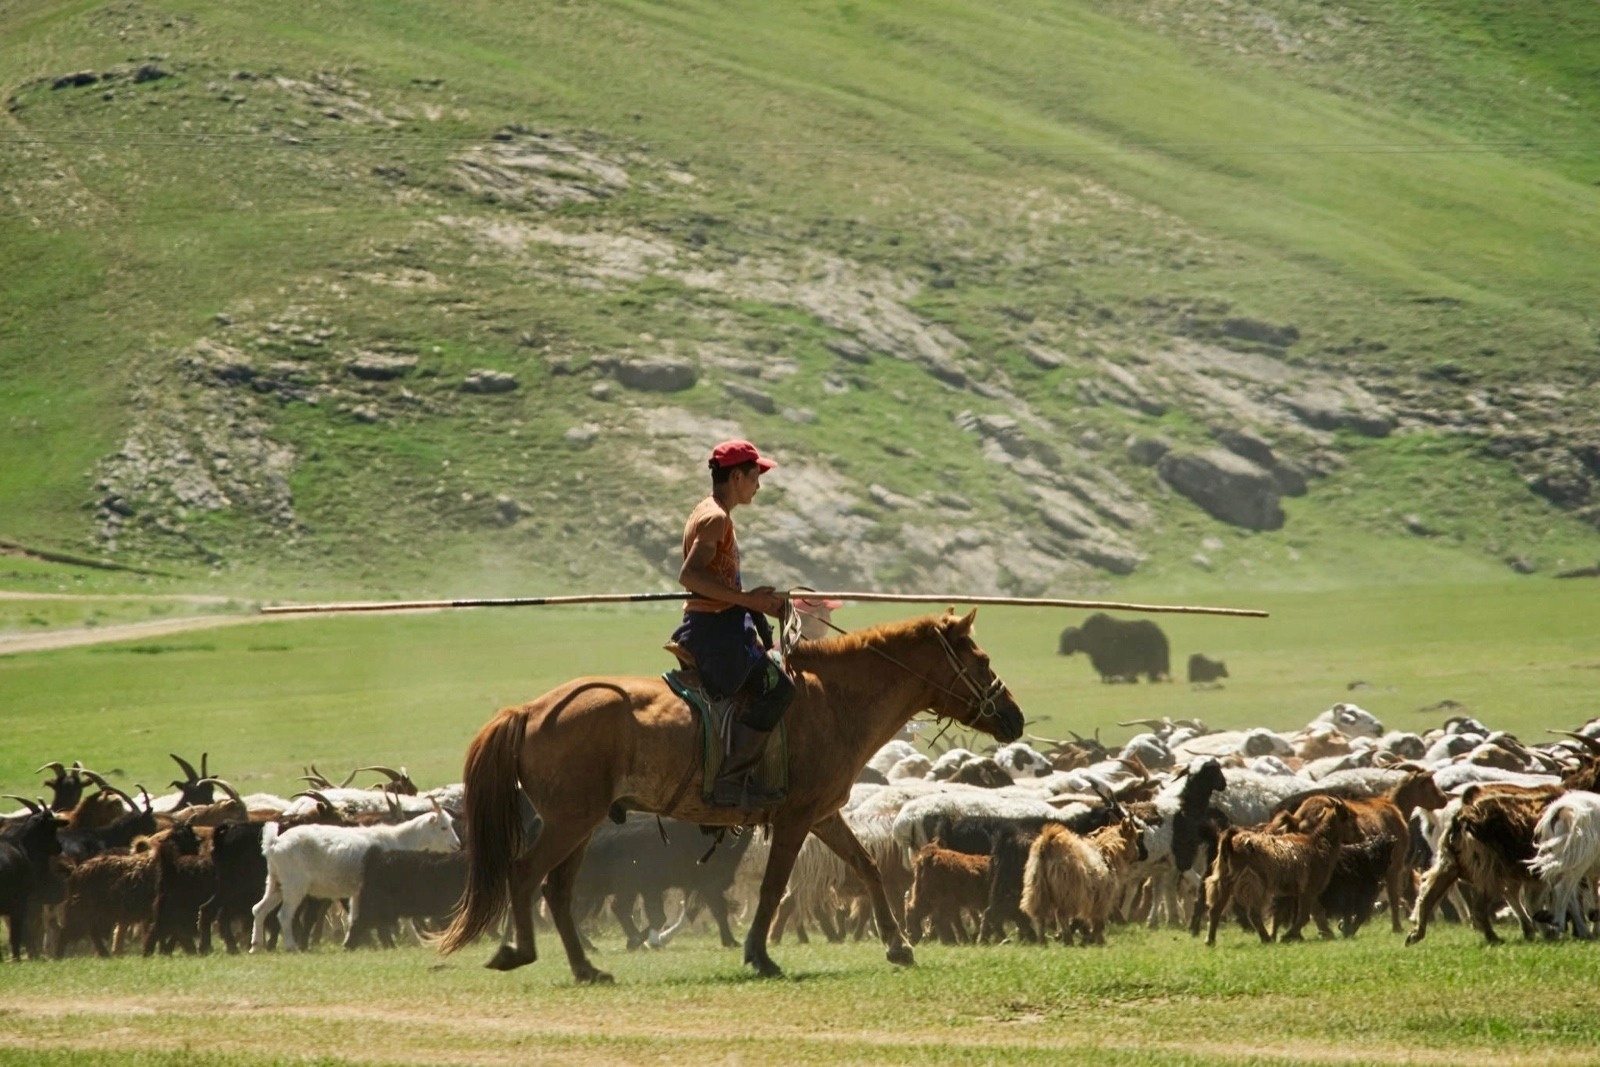 The steppe of Mongolia has been likened to high, open and treeless country of Montana and Wyoming. Herders there confront the same wildlife predator issues that their counterparts in the American do. And wolves are killed to protect livestock and in hunts. Still, cultural attitudes are different, Watters say, and people are shocked to learn that in America wolves were targeted for annihilation. Photo courtesy 